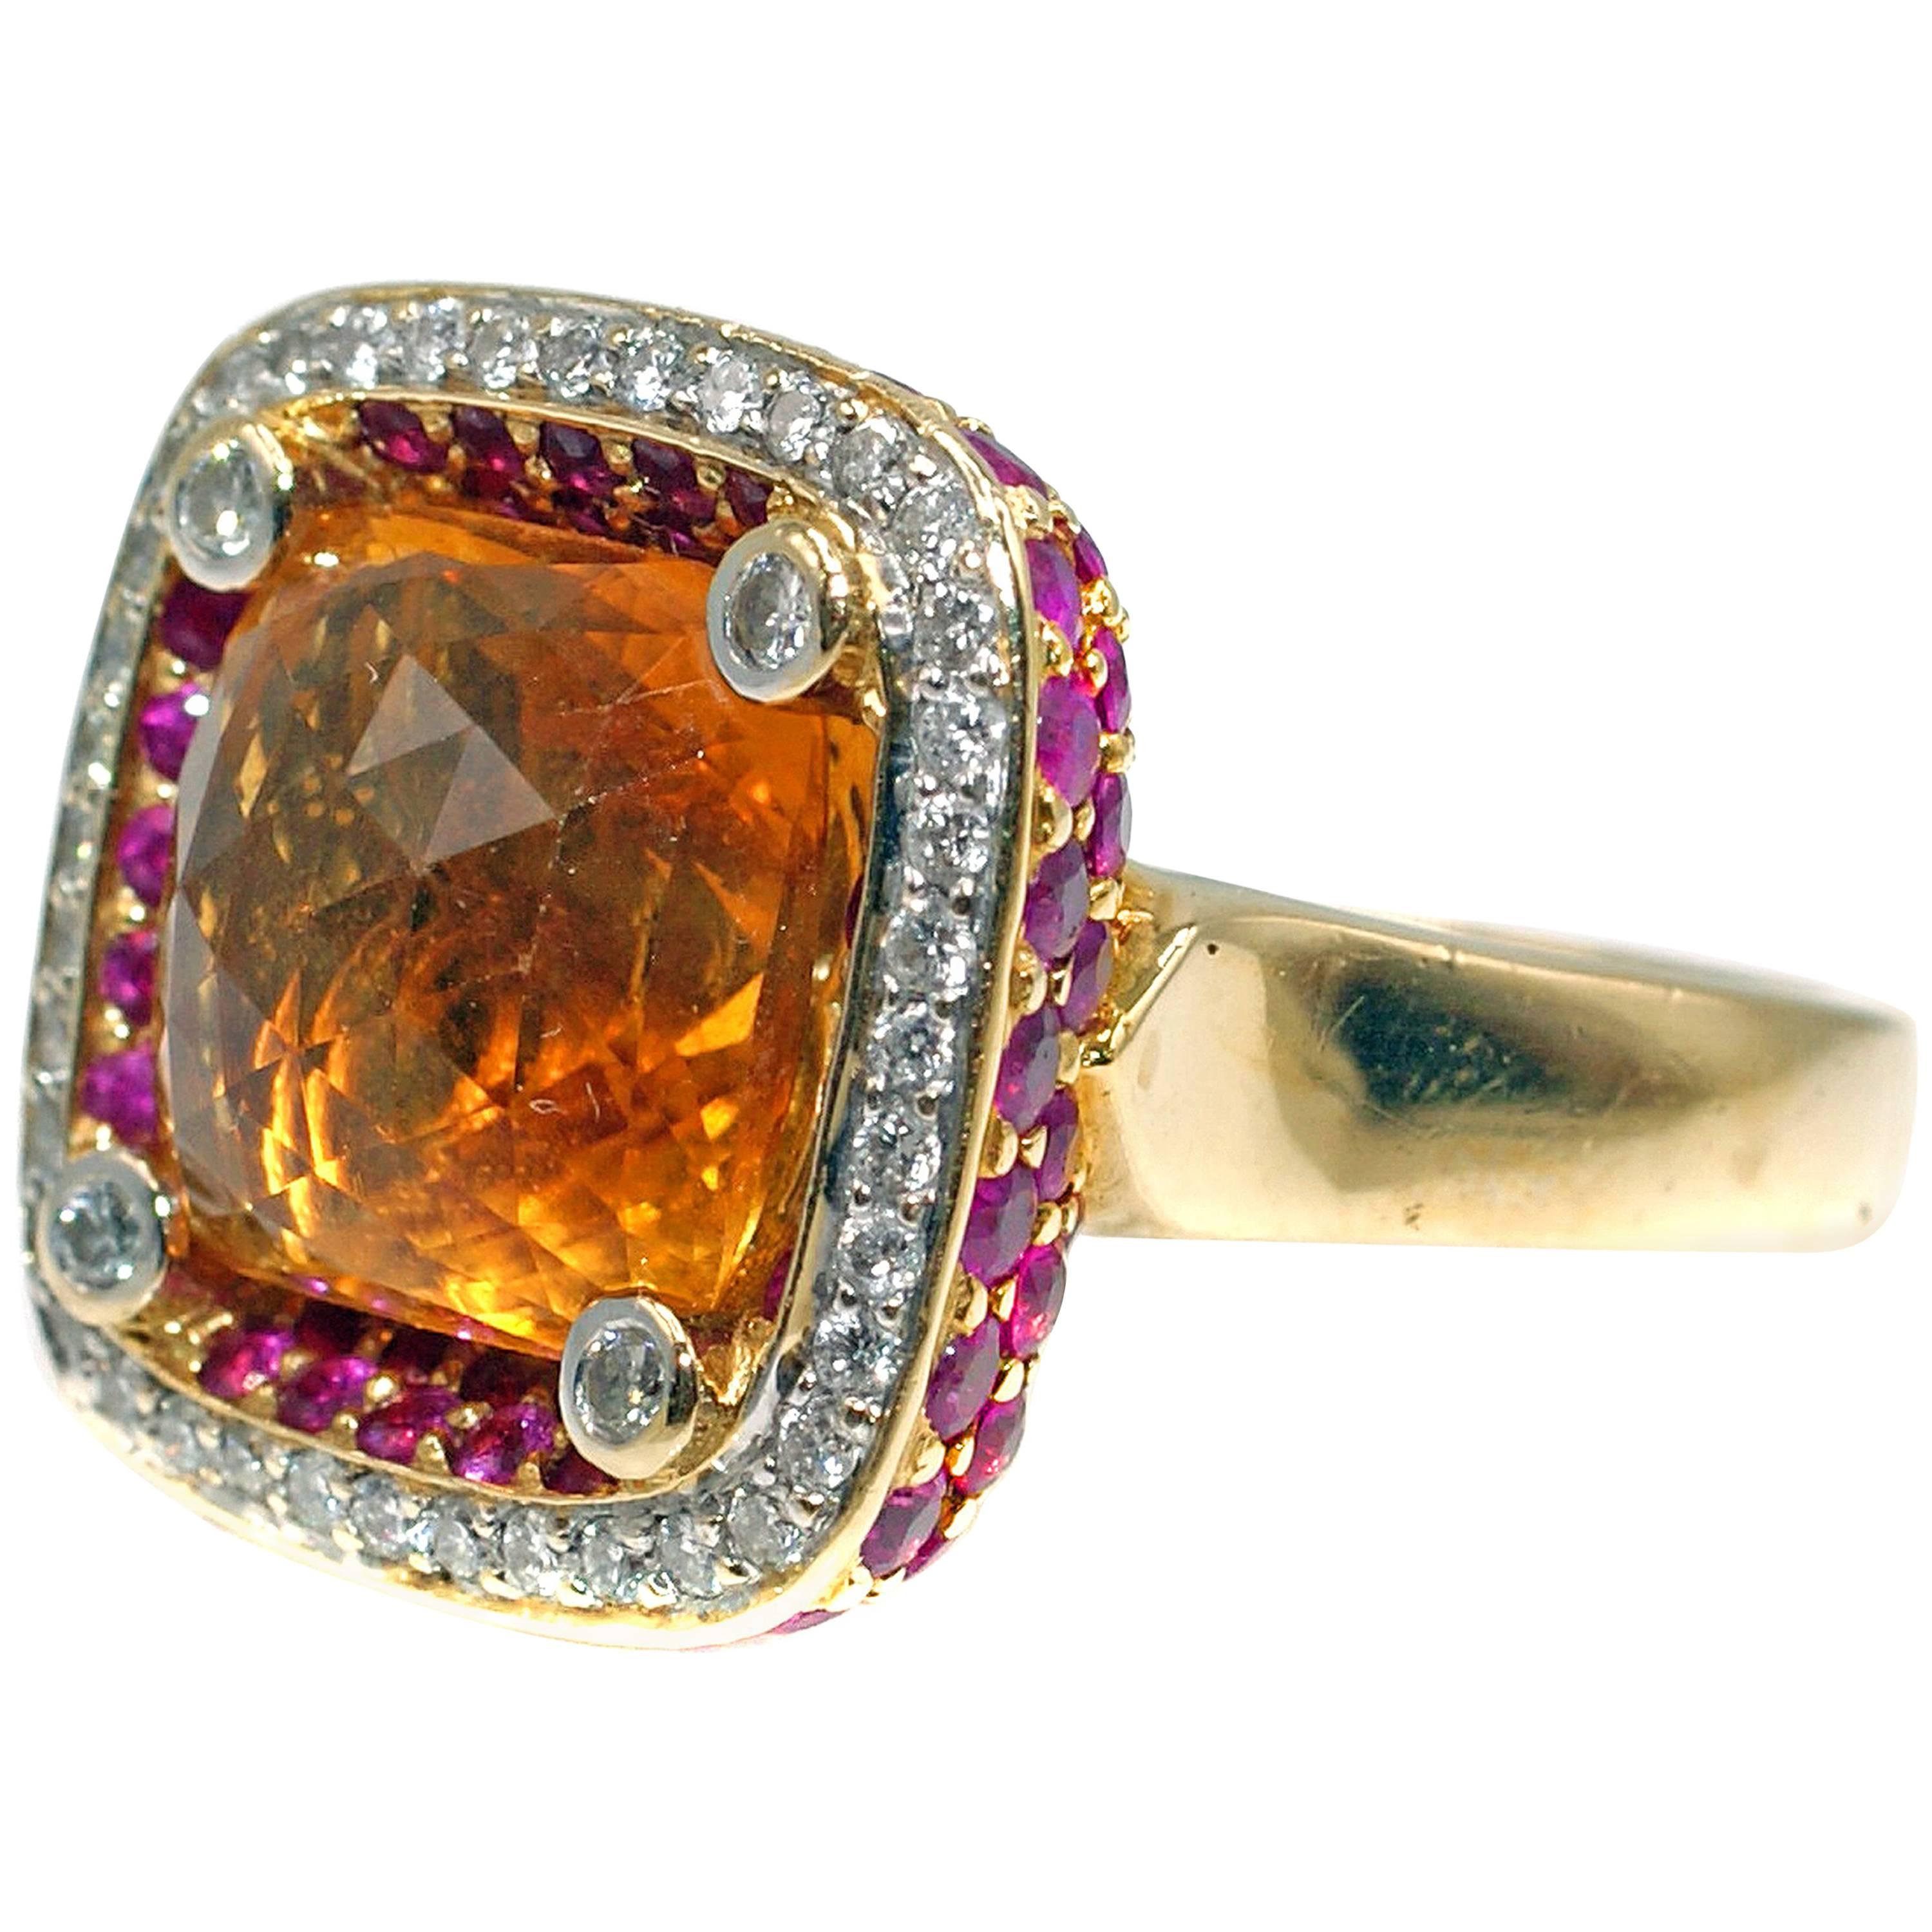 3.12 Carat Rose Cut Faceted Citrine Diamond and Pink Sapphire Gold Ring